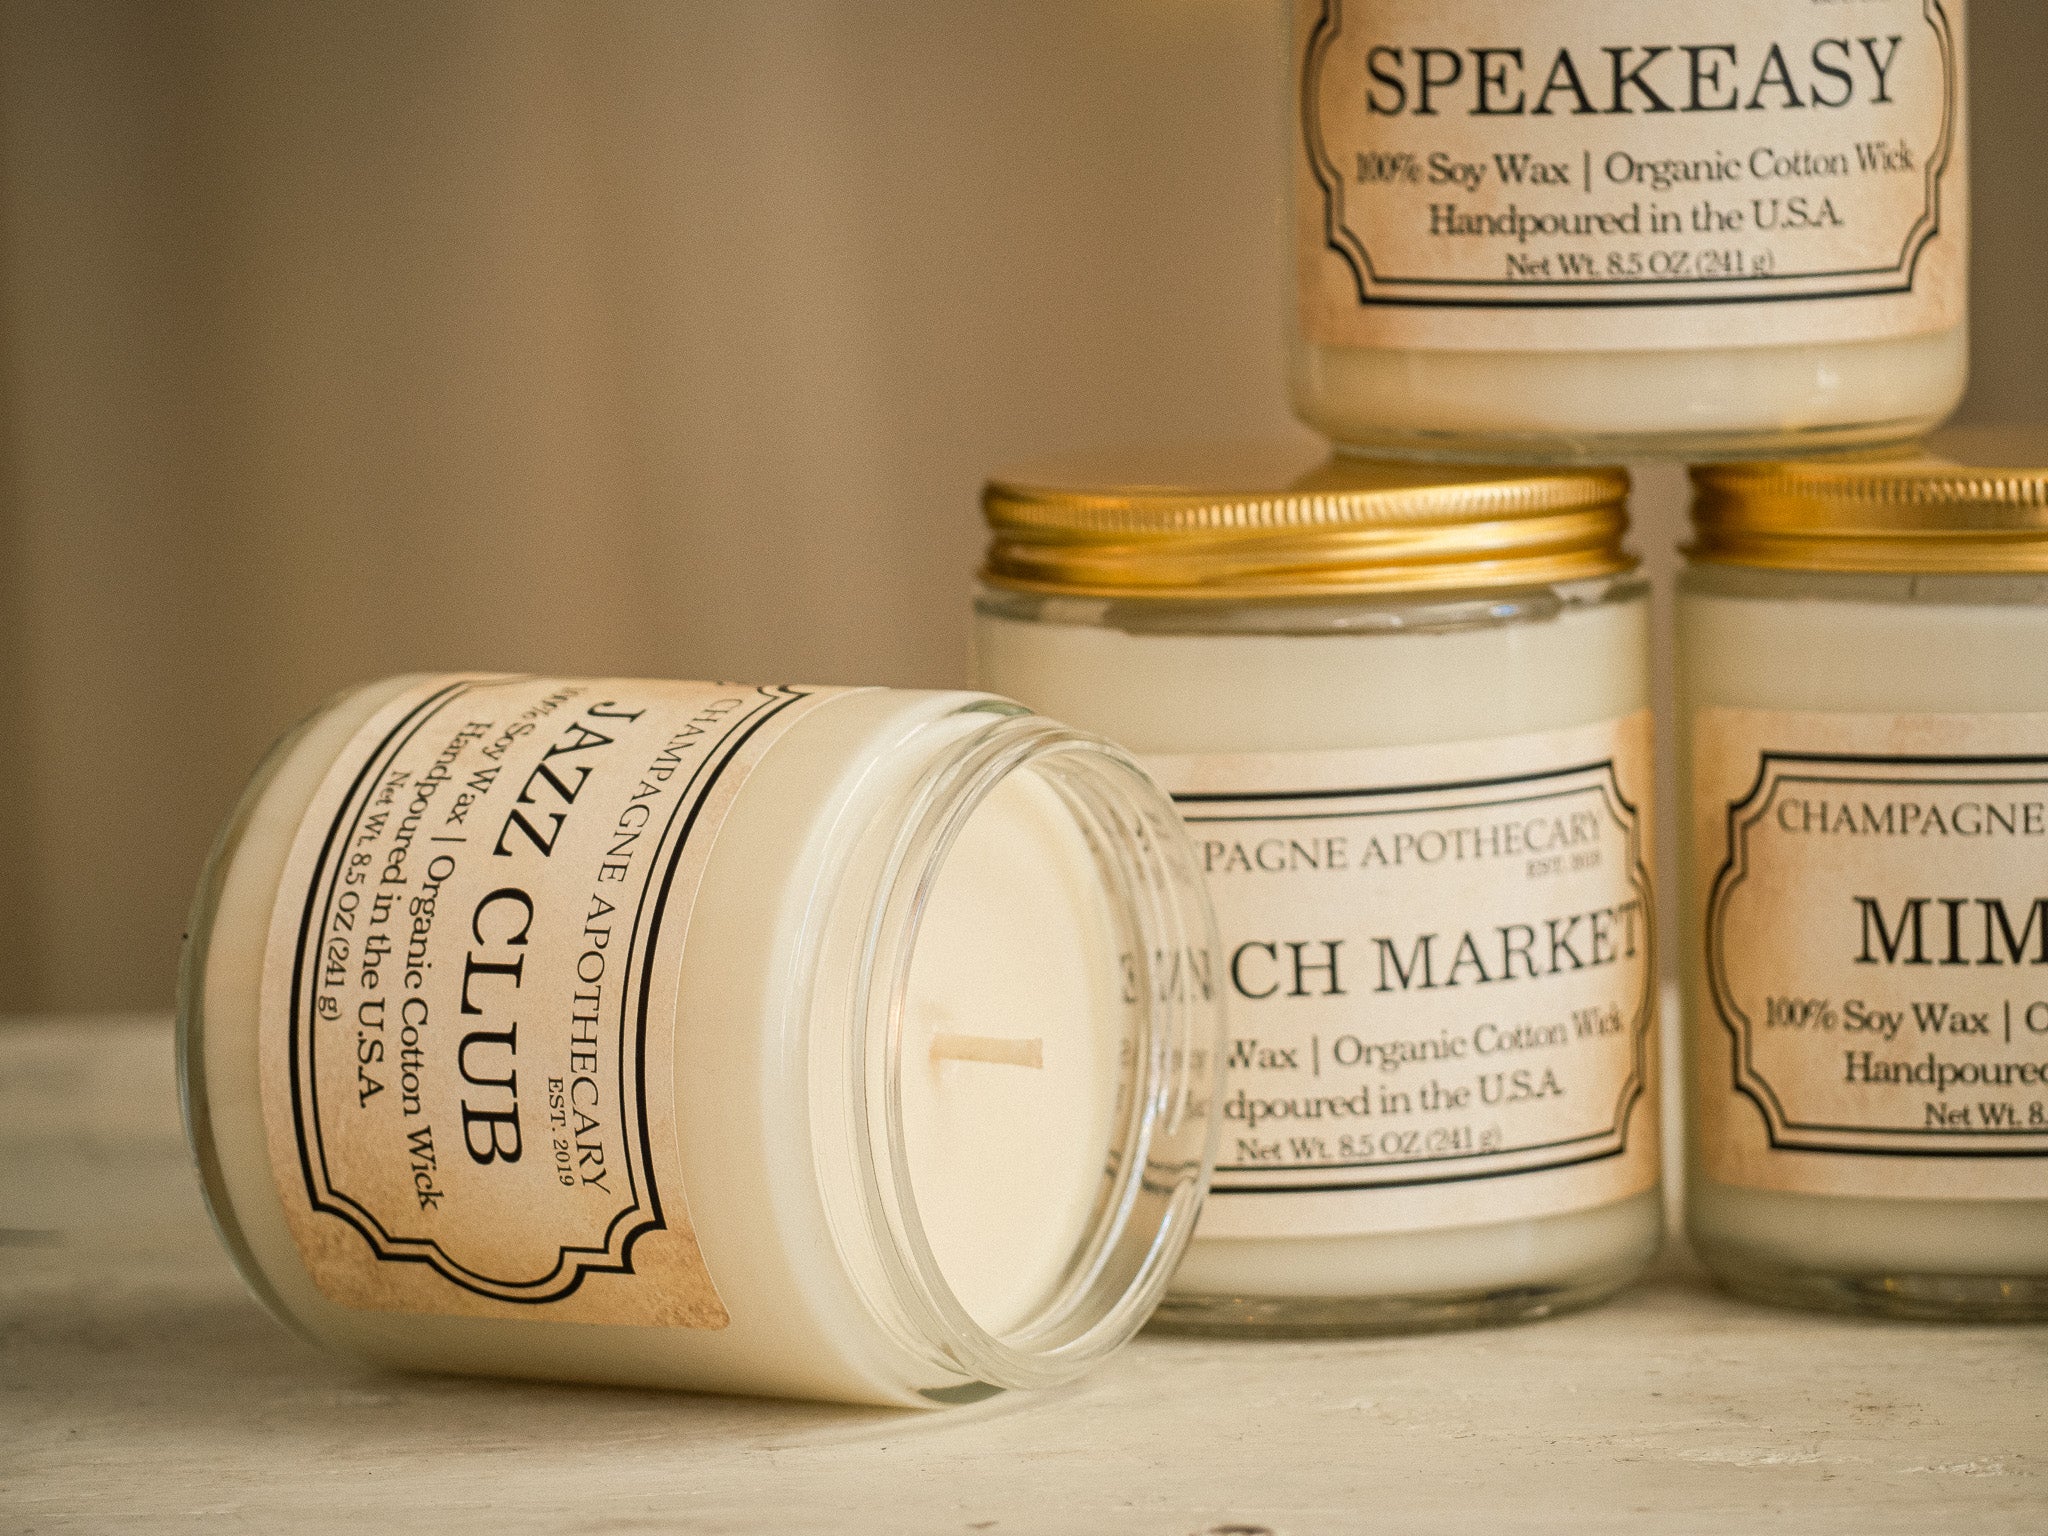 Champagne Apothecary offers 100% Soy Wax Candles These 100% soy candles burn so smoothly! And smell so good! Pair with some of our branded apothecary matches for the perfect gift! Plus for each candle sold, one meal is donated to those in need through Feeding America! Candle Details: Hand poured in the USA 100% soy wax Organic Cotton Wick Natural Fragrance Approximately 40 hour burn time 9 Vintage Scents Available